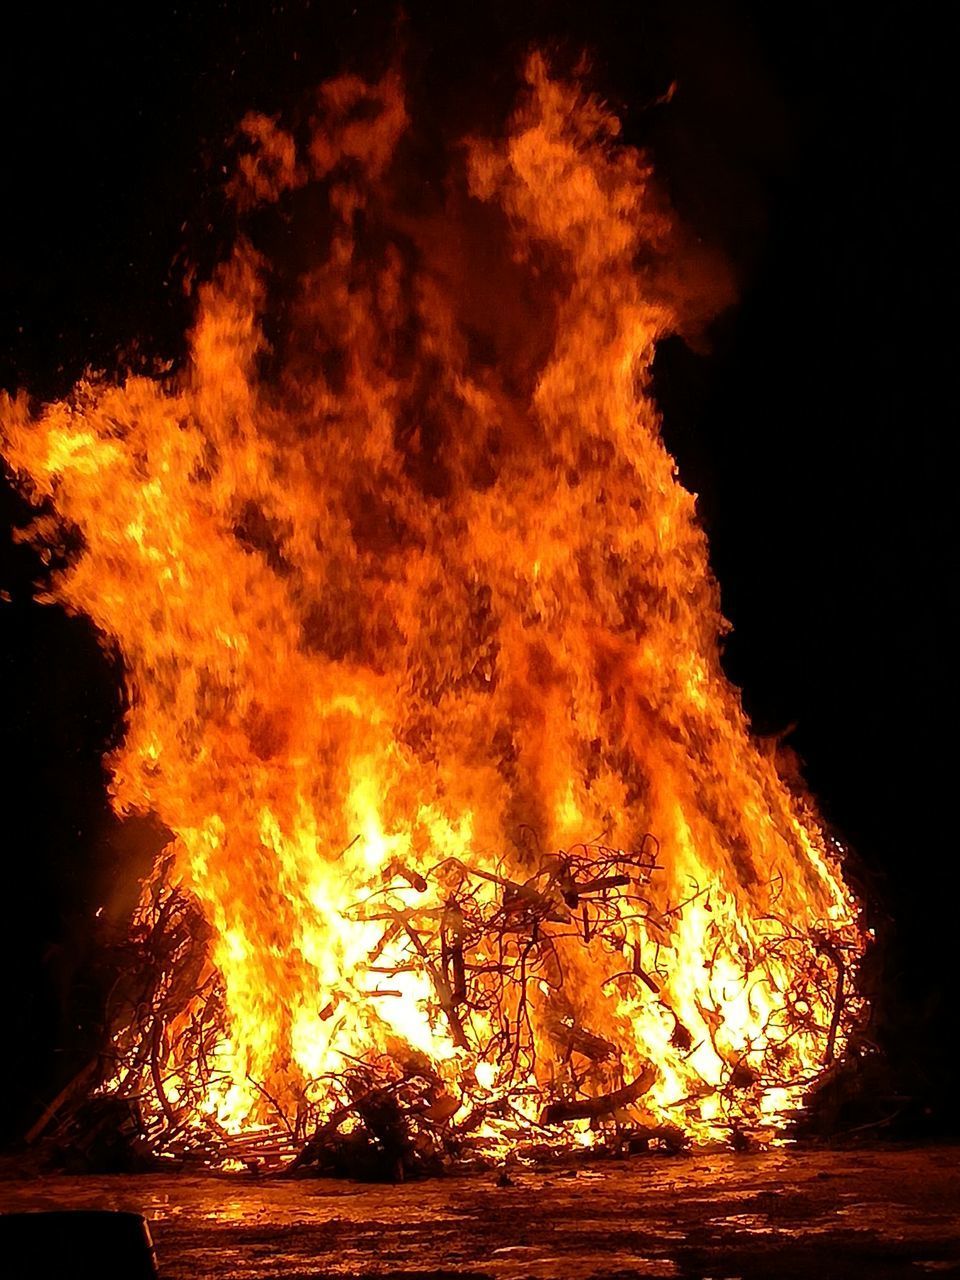 VIEW OF BONFIRE AT NIGHT DURING AUTUMN